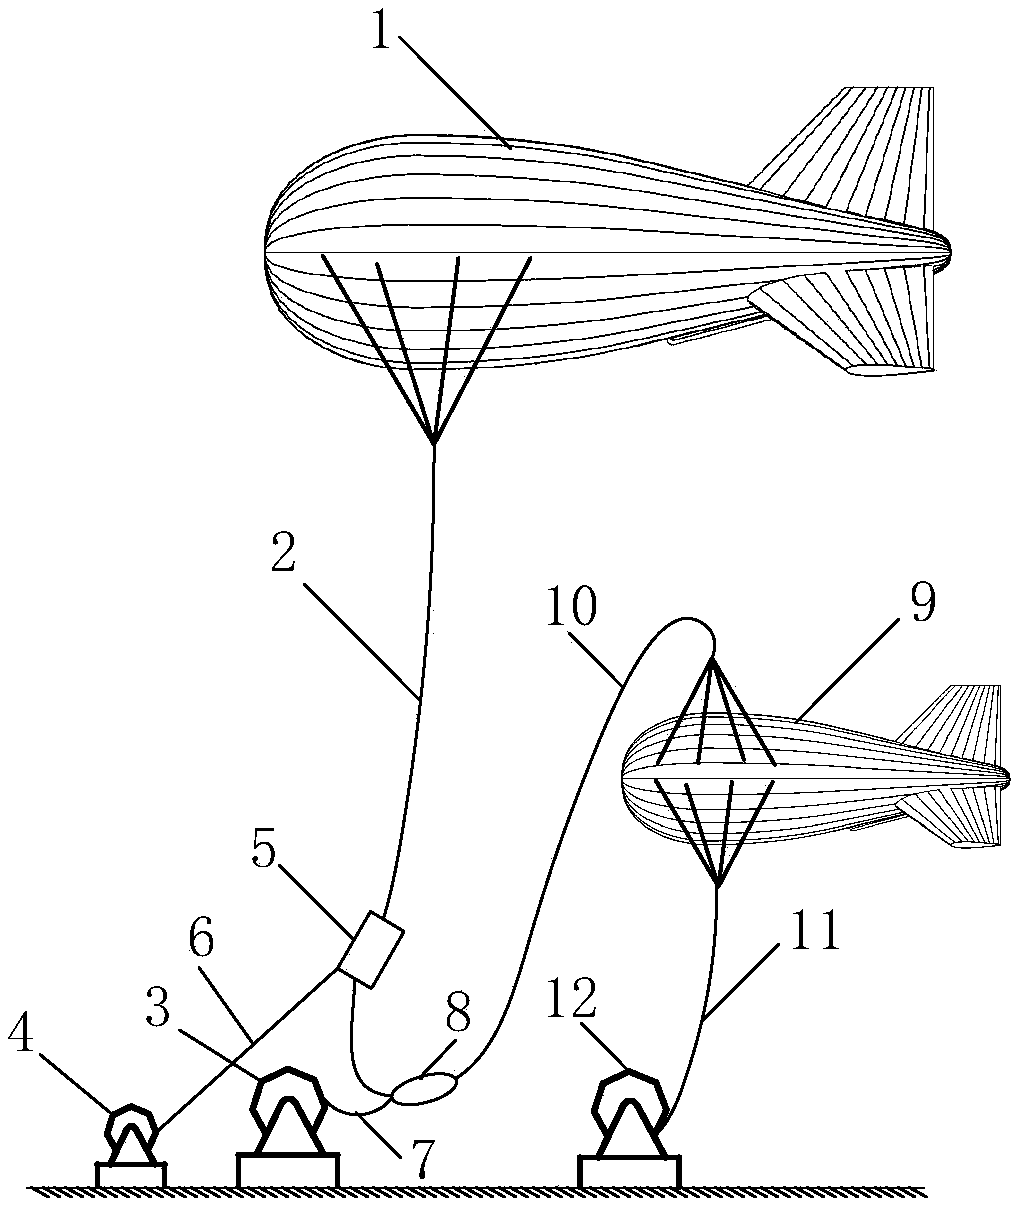 Series-type tethered aerostat and releasing method thereof